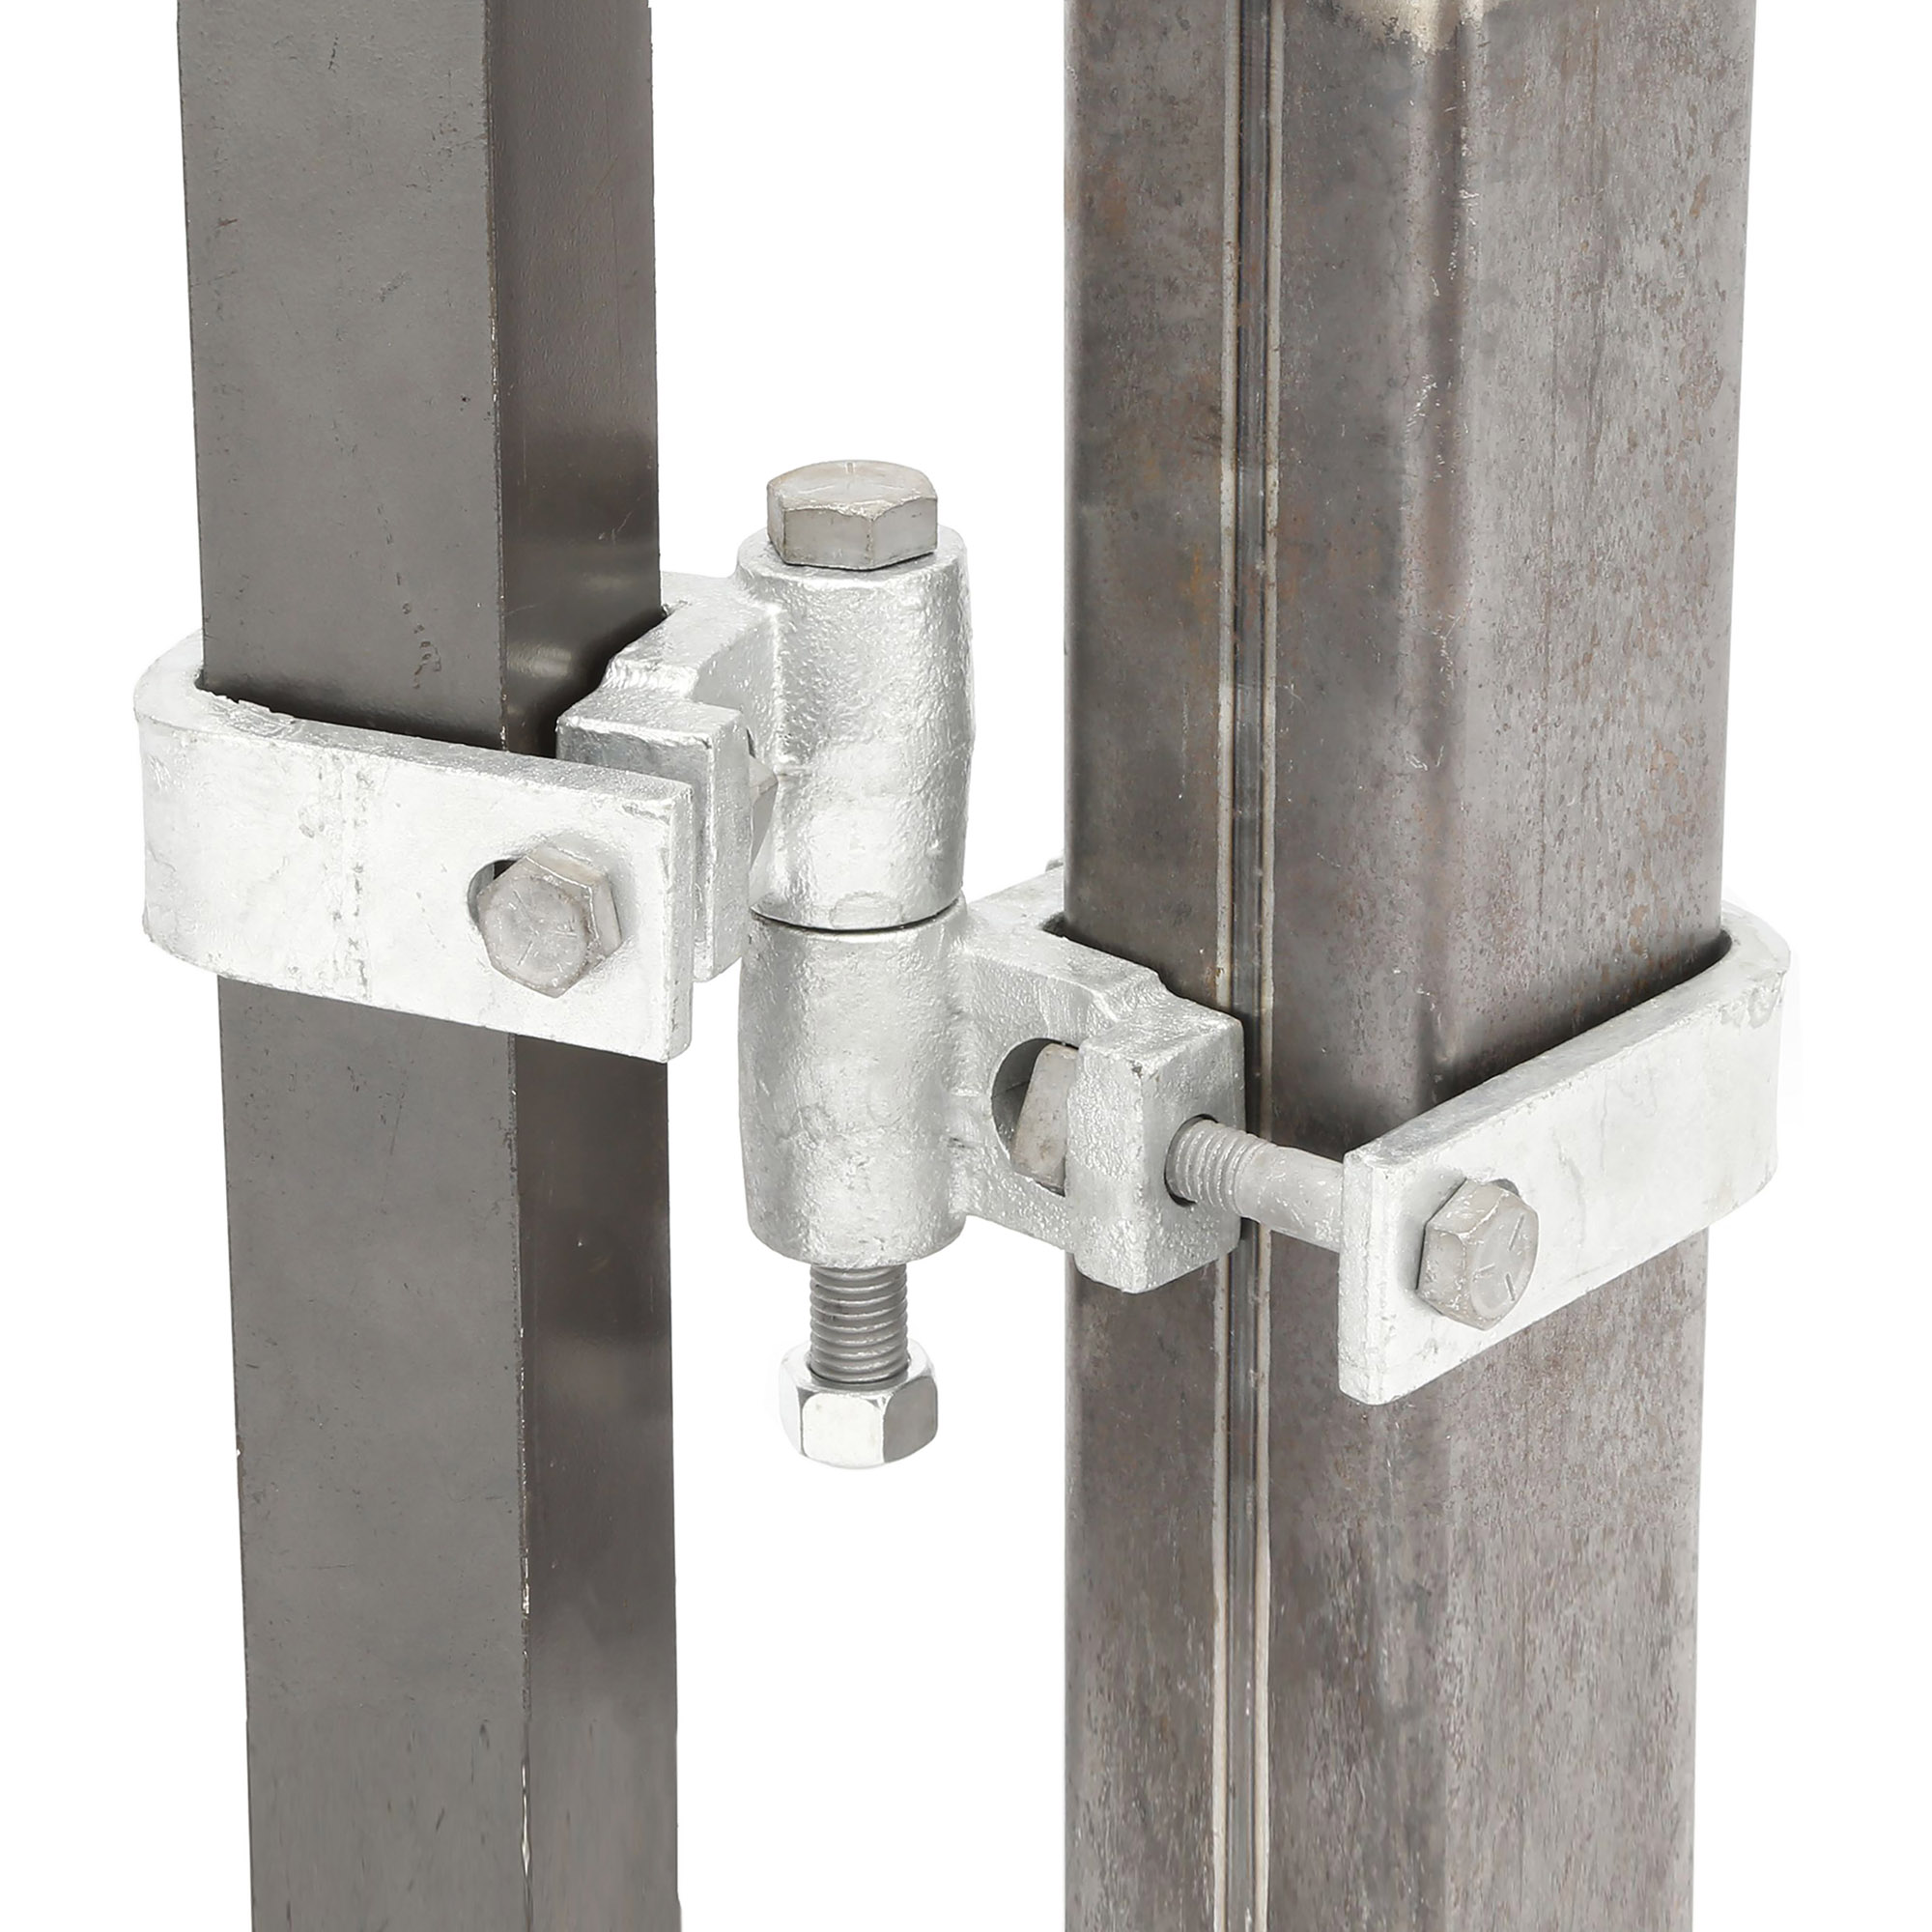 180 Degree Square To Square Gate Hinges